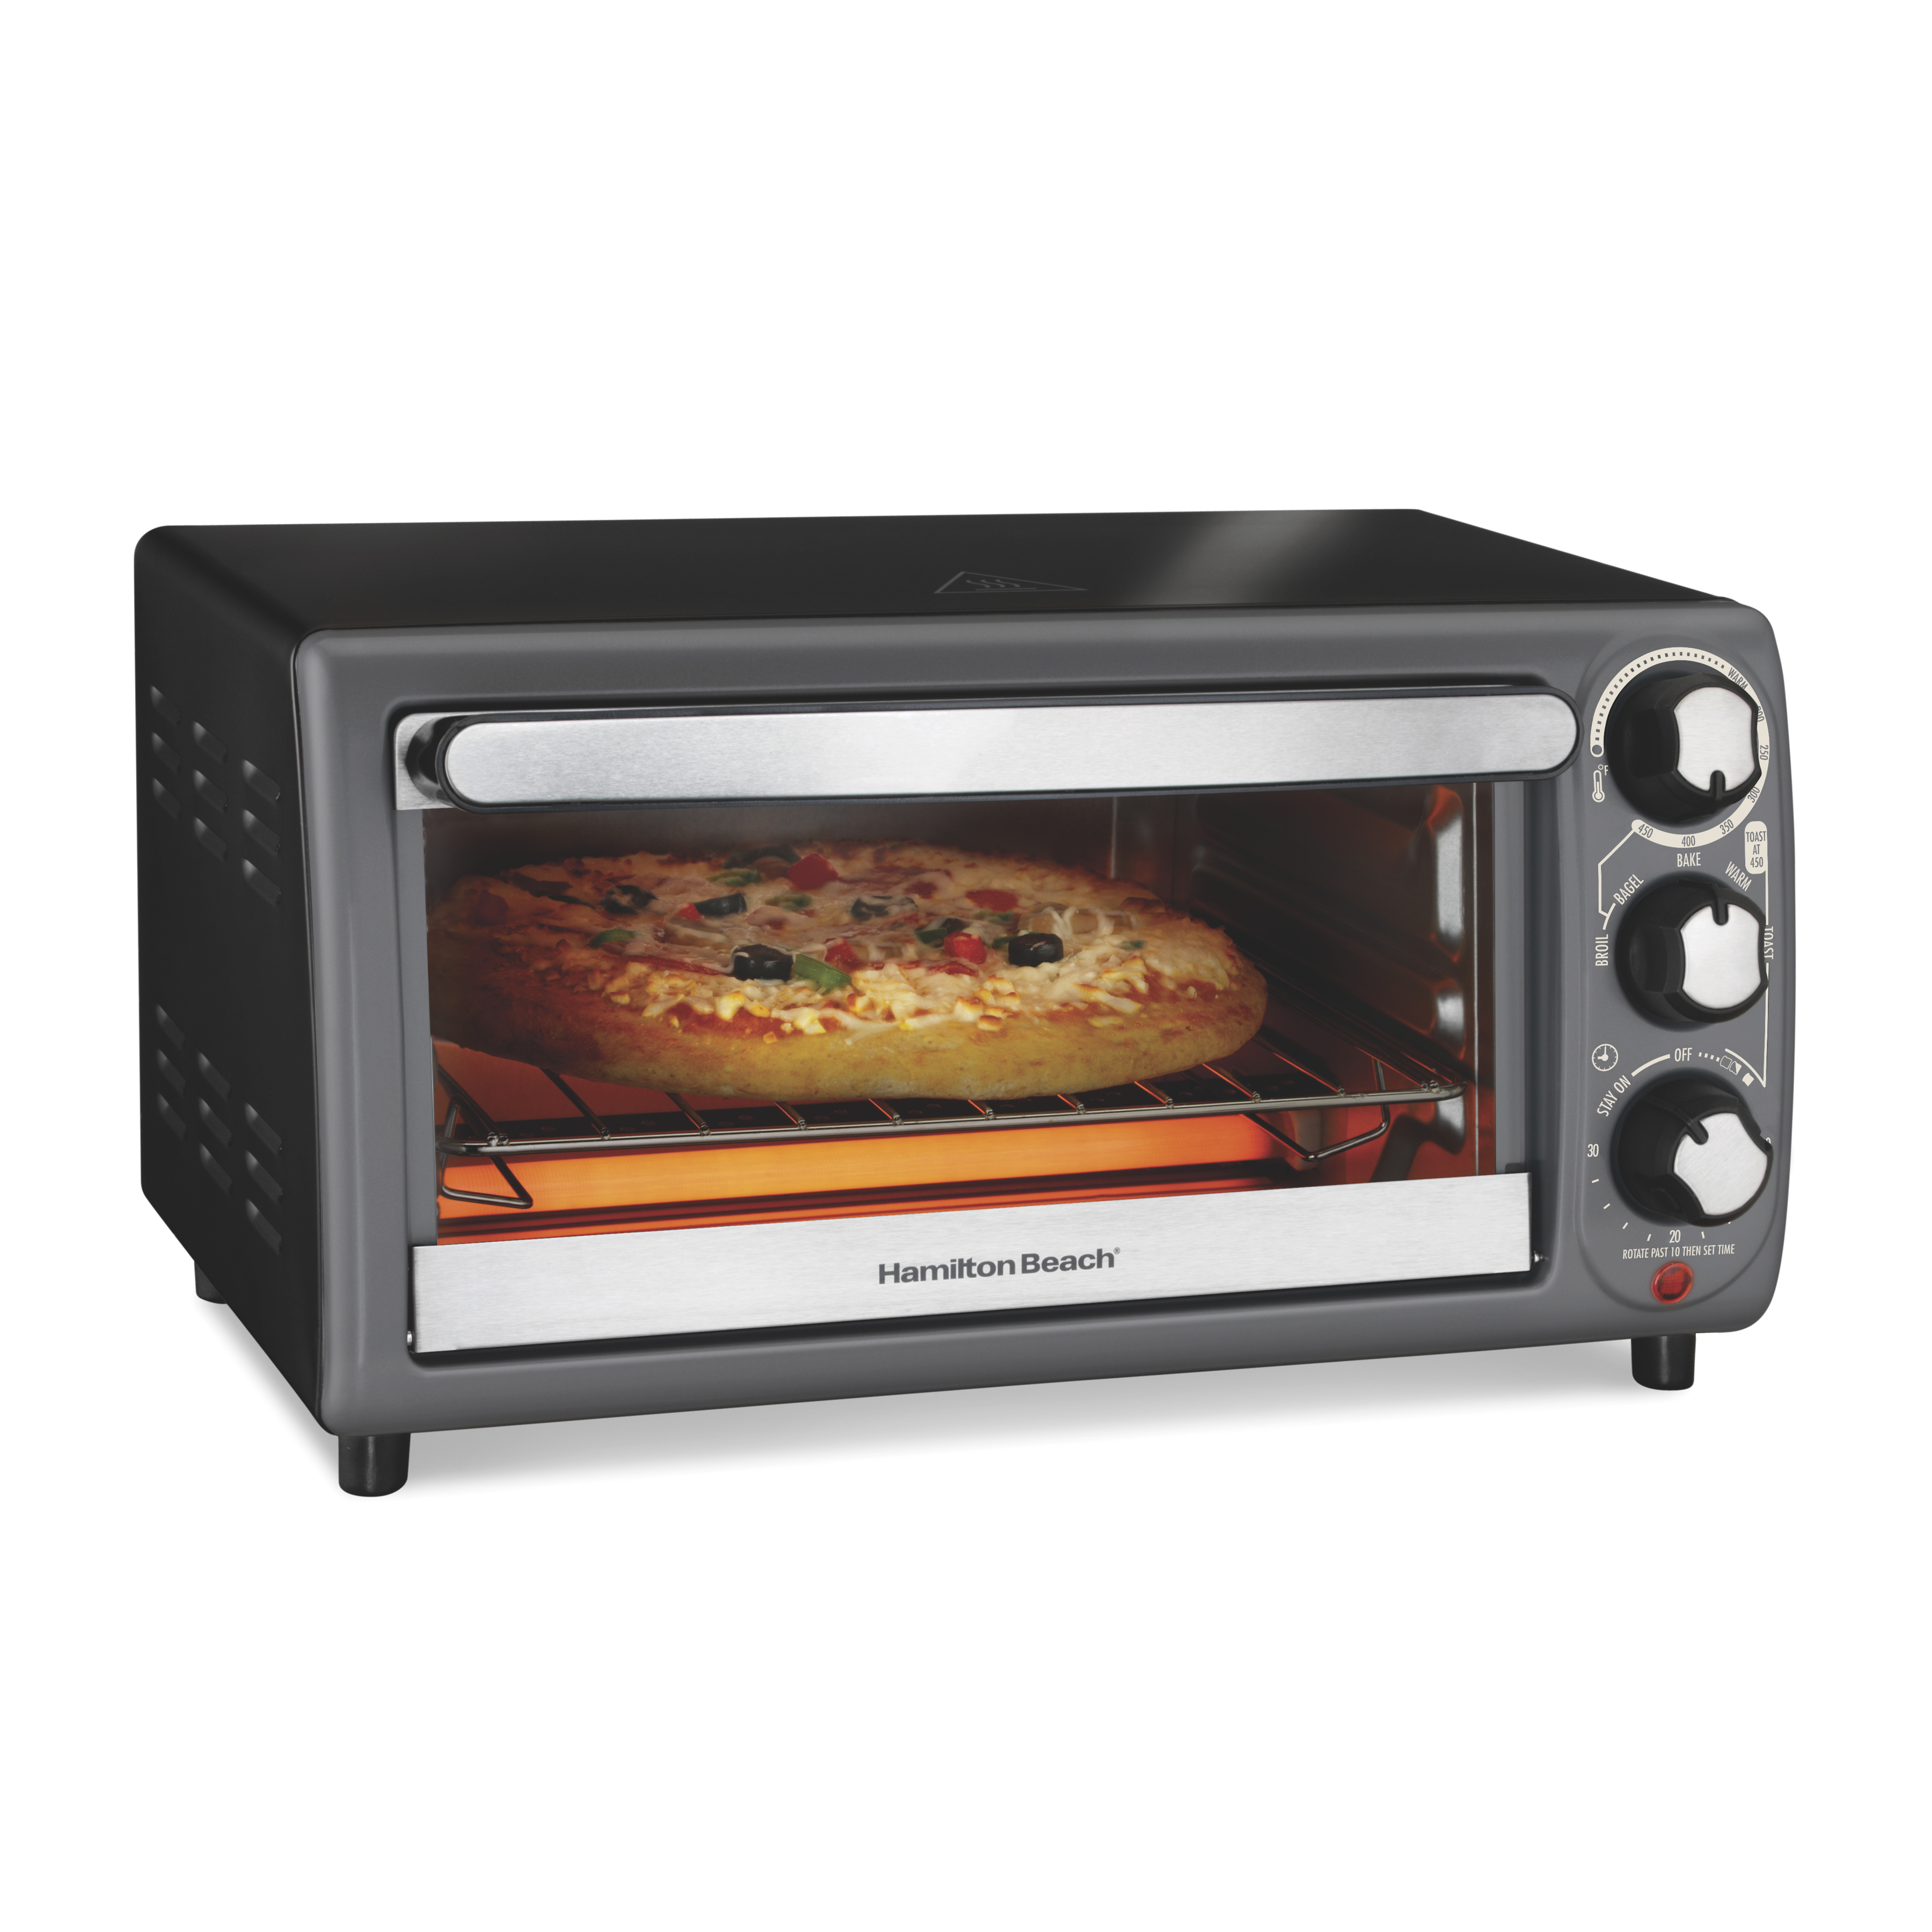 Hamilton Beach Toaster Oven, Black with Gray Accents, 31148 - image 1 of 8